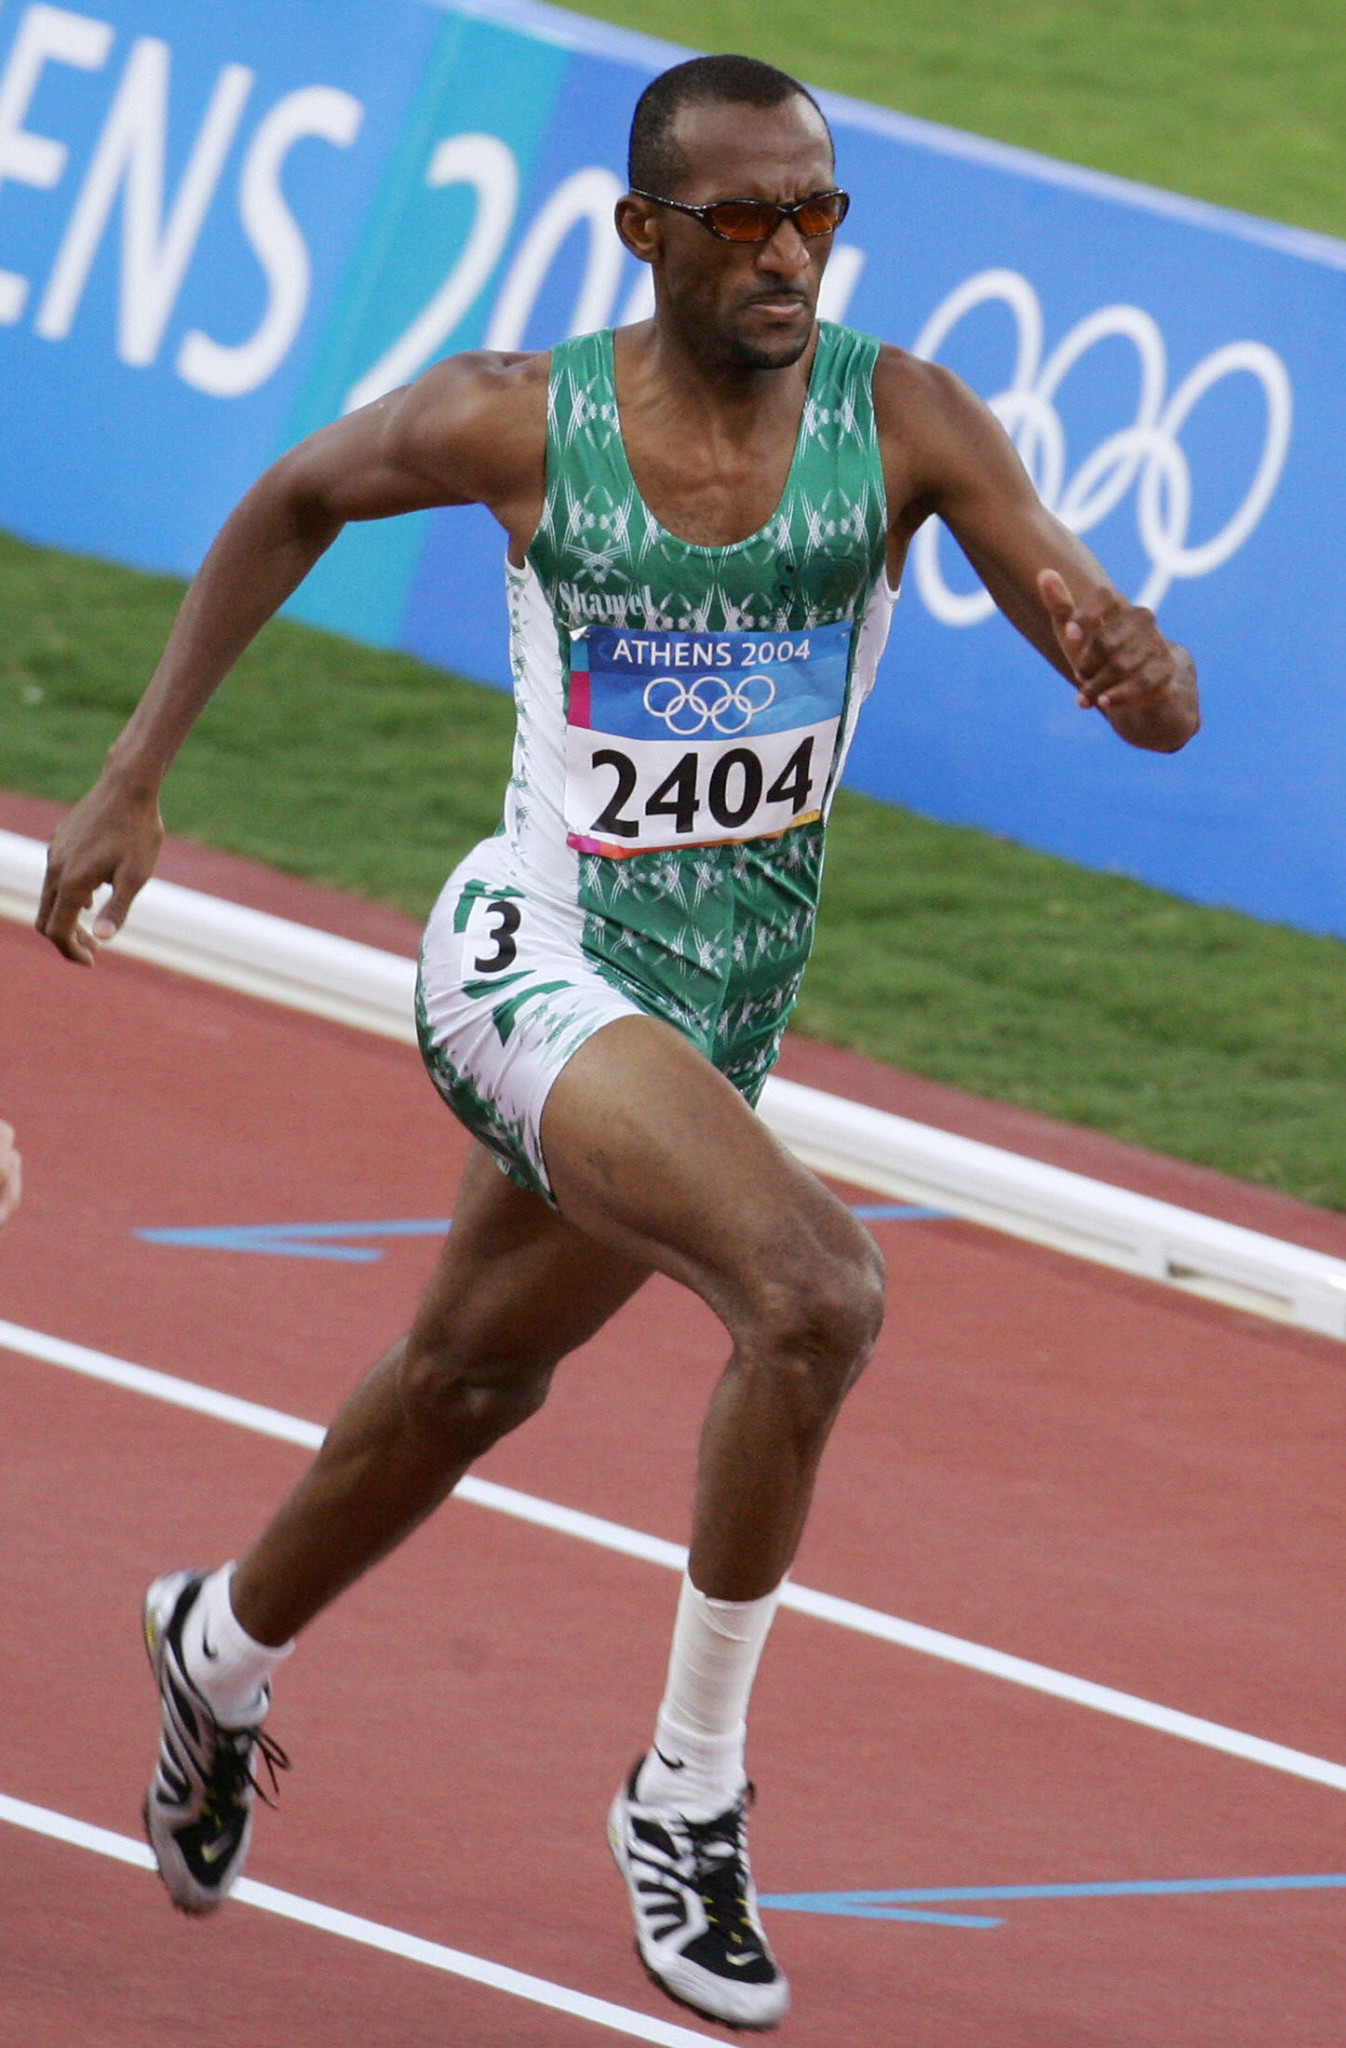 Hadi Al-Somaily won Olympic silver for Saudi Arabia at Sydney 2000 ©Getty Images